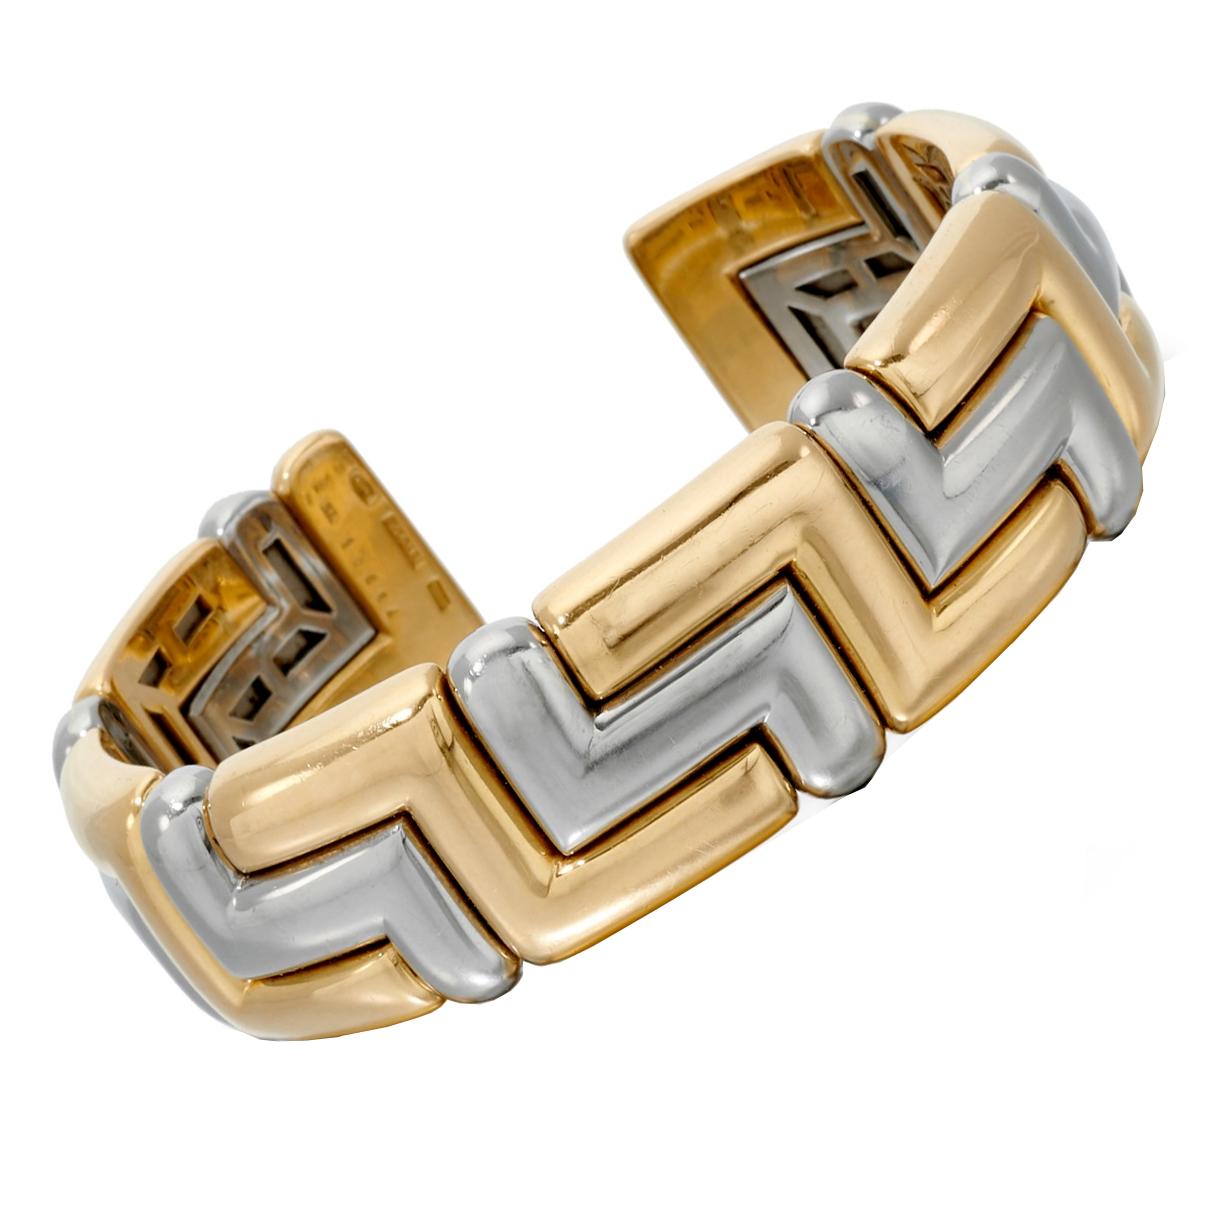 A must have vintage Bvlgari cuff bangle bracelet showcasing white and yellow gold in a geometric motif. The internal opening is roughly 6.5